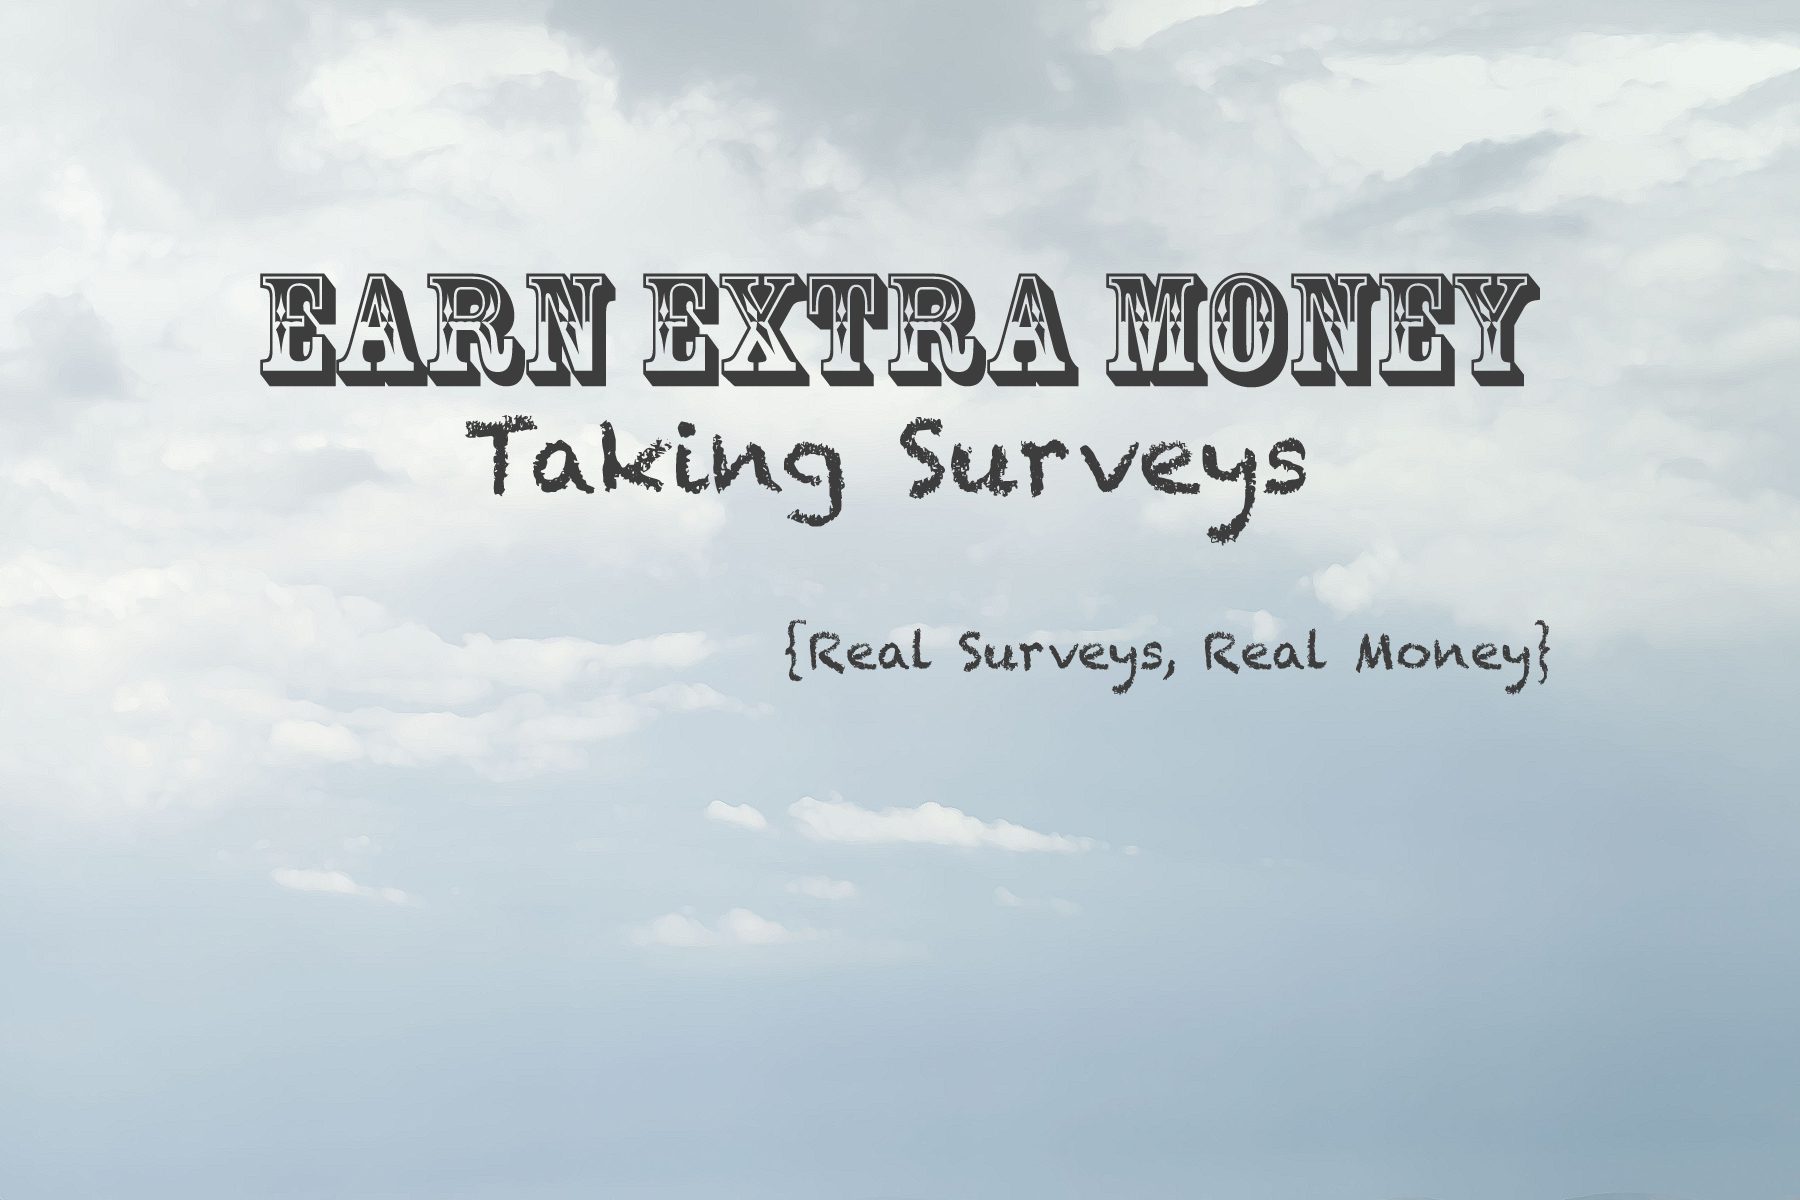 ... Money Taking Surveys {real surveys that pay real cash or gift cards